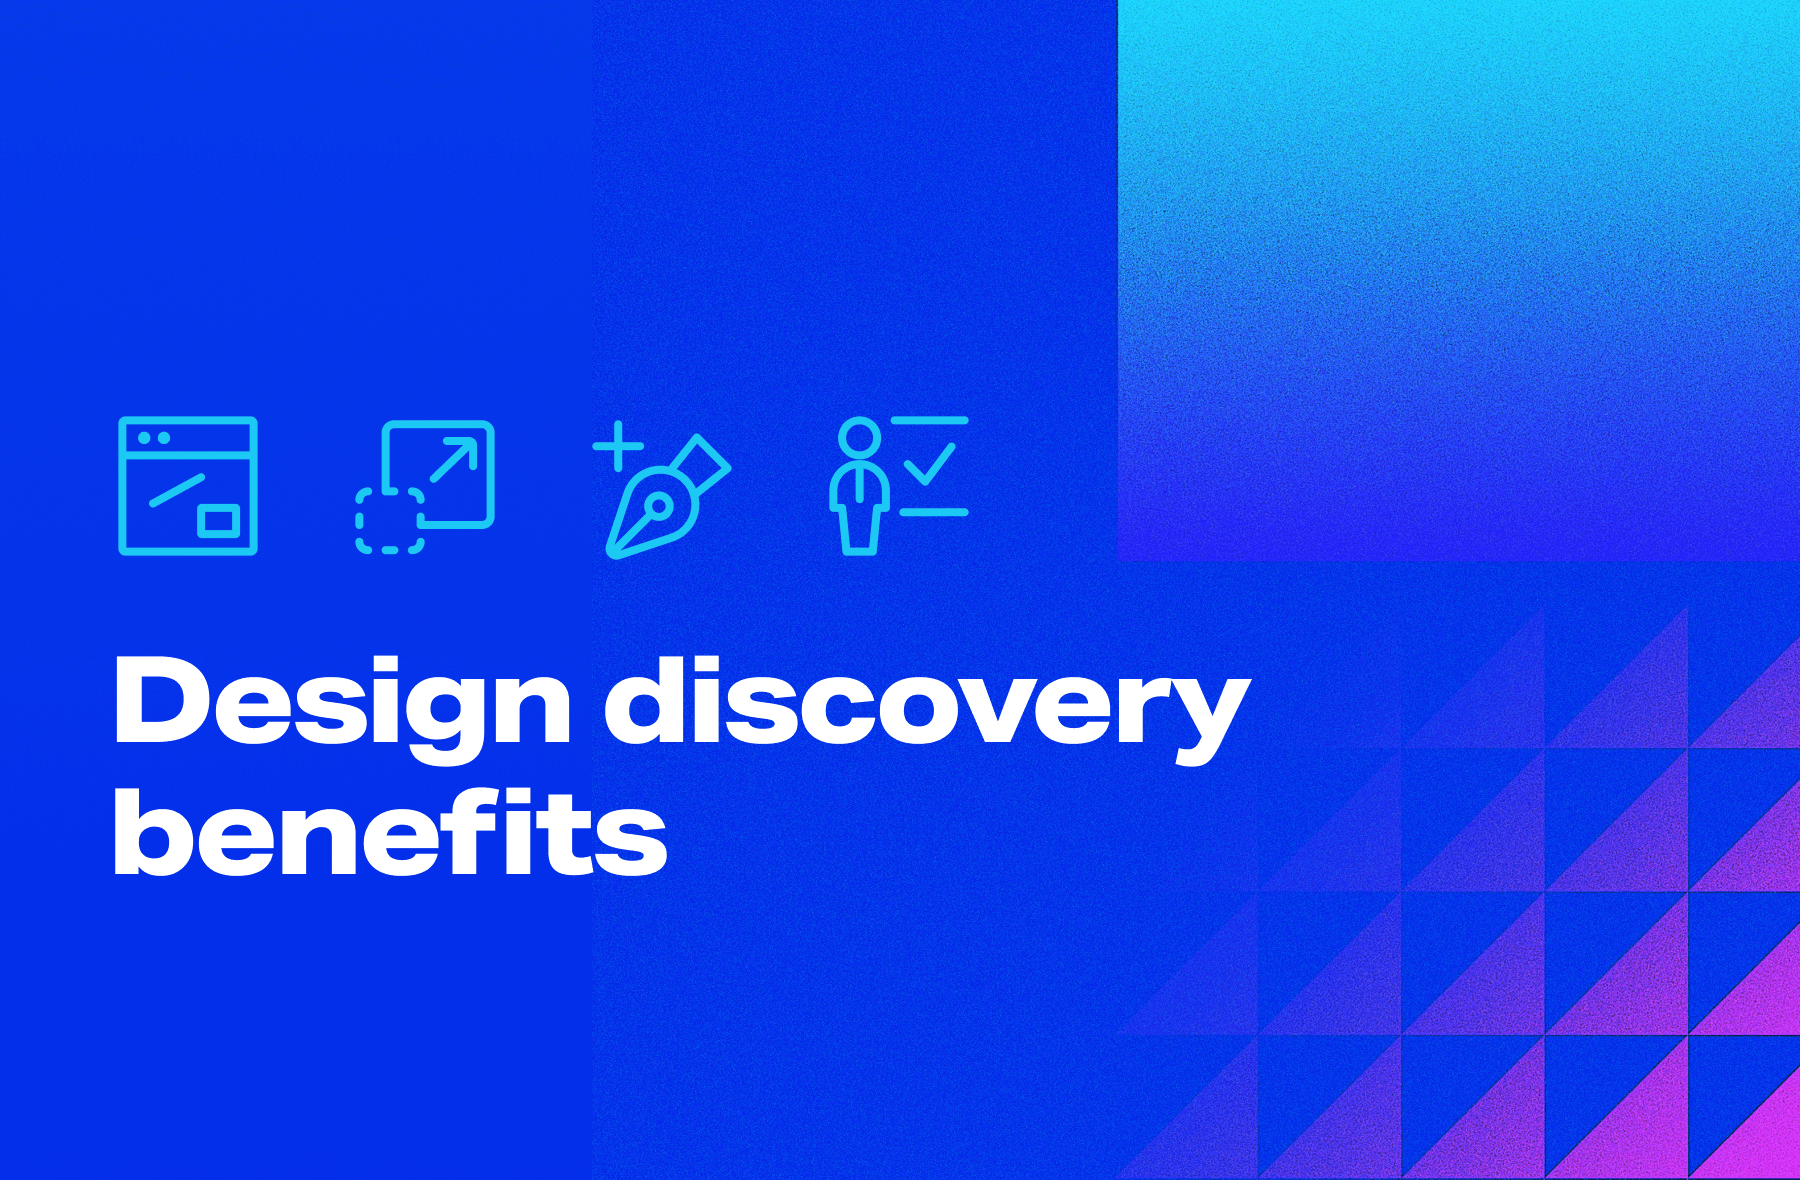 design discovery benefits? user research for your project will support you moving forward with regular planning, testing, and exploring.